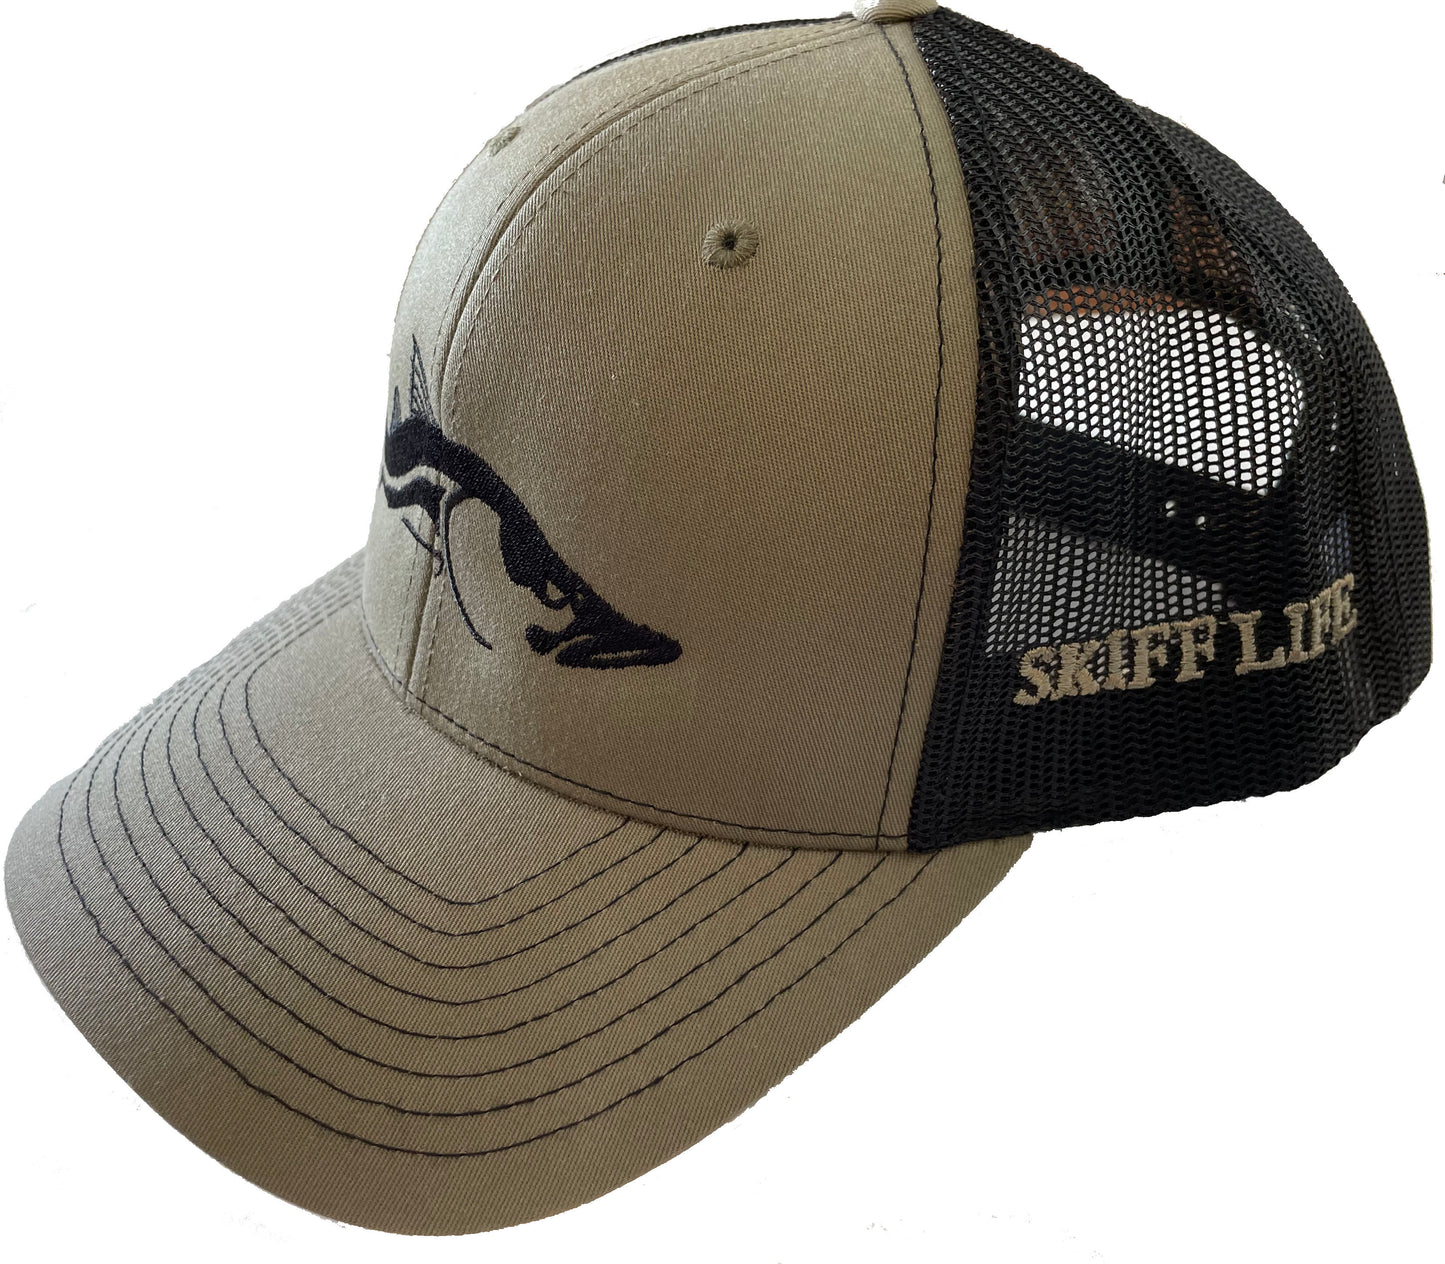 Snook Olive/Loden with Black Meshback RICHARDSON Trucker Hats by Skiff Life - Skiff Life